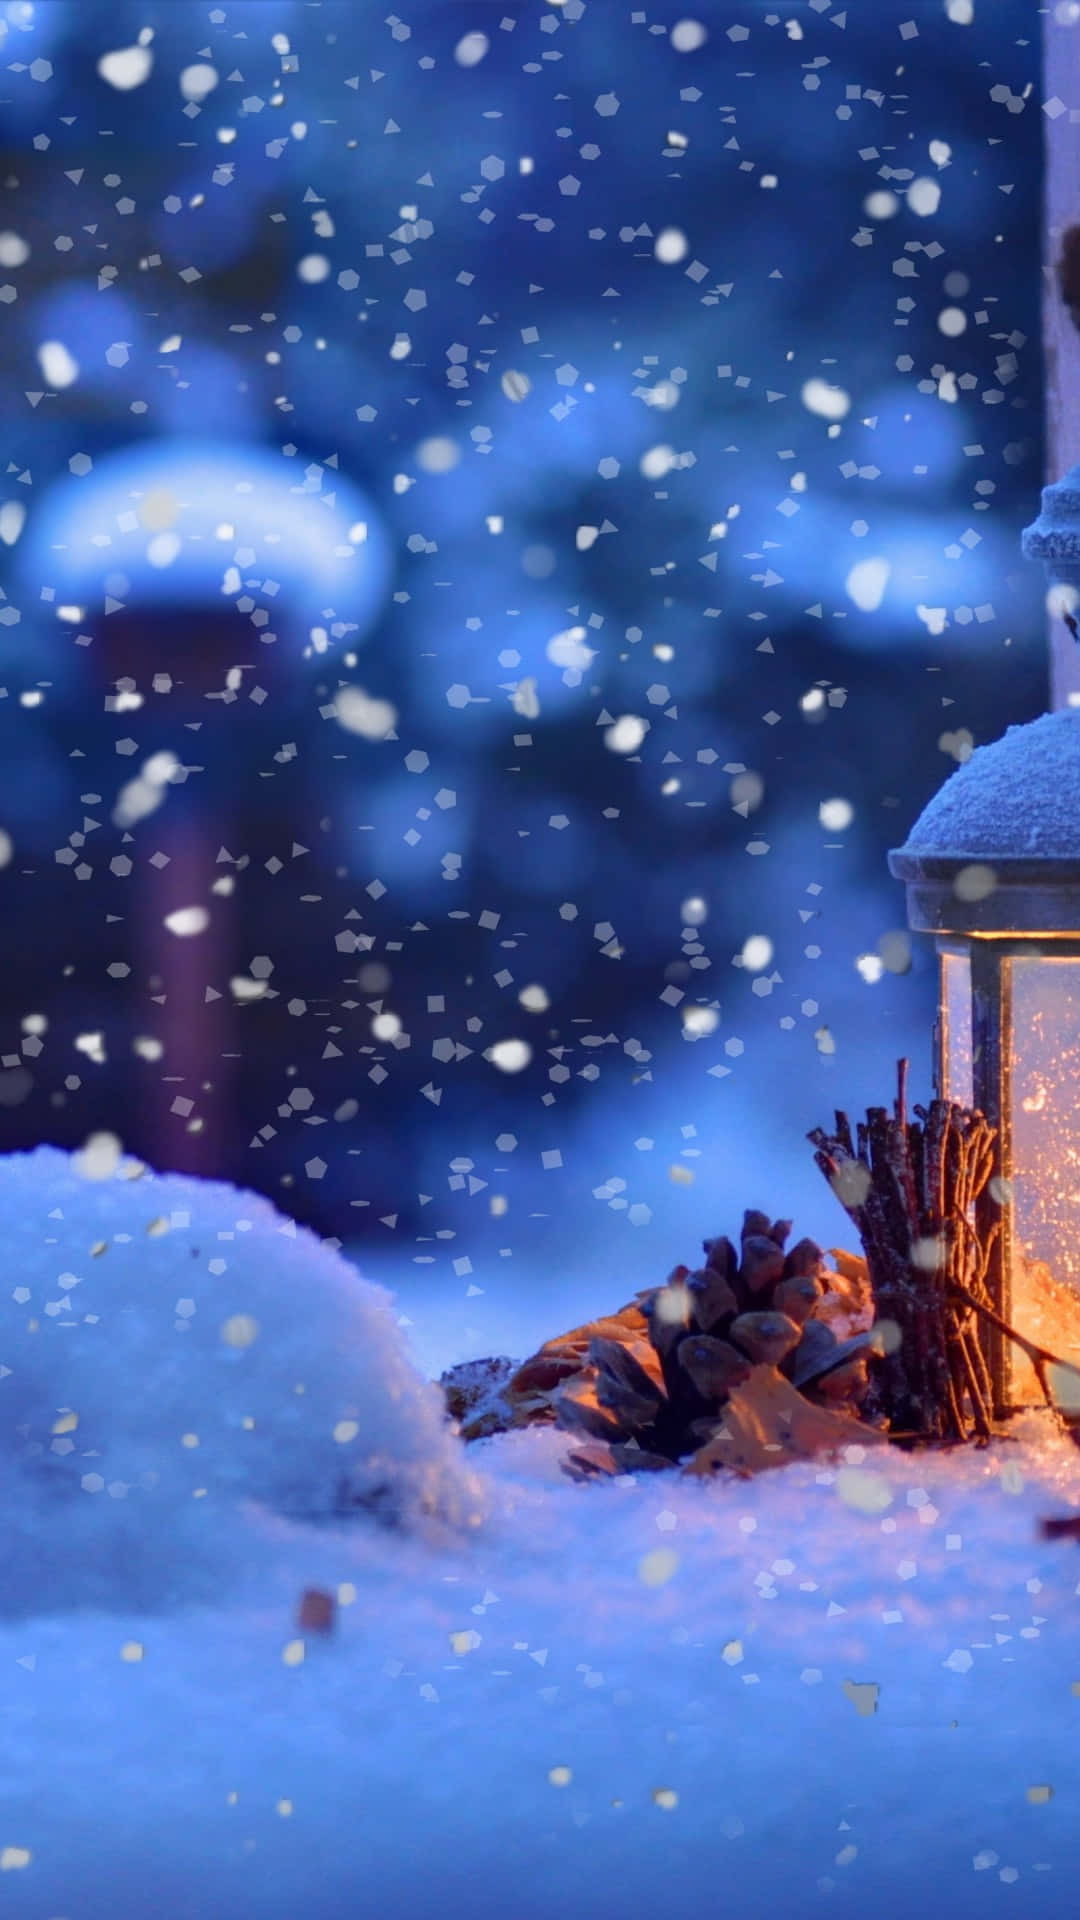 Celebrate the season with a winter wonderland of Christmas snow Wallpaper